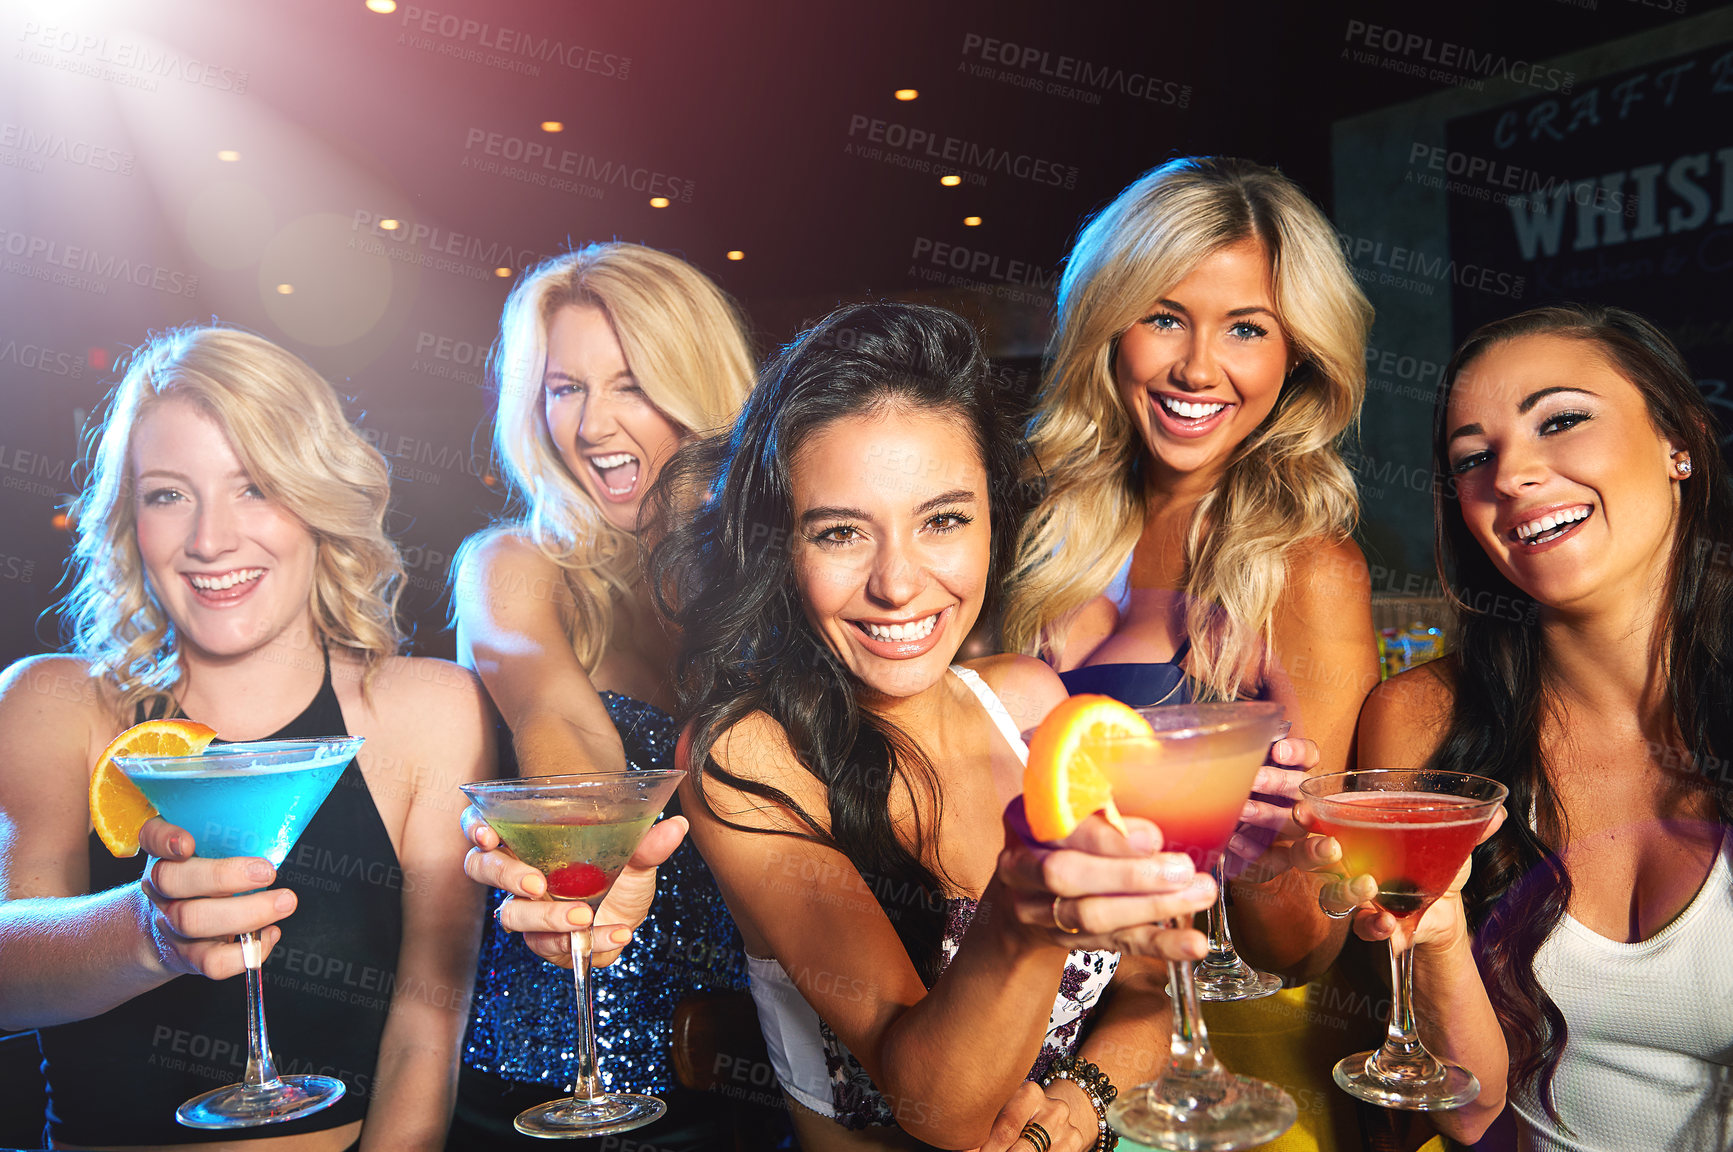 Buy stock photo Shot of young women drinking cocktails in a nightclub